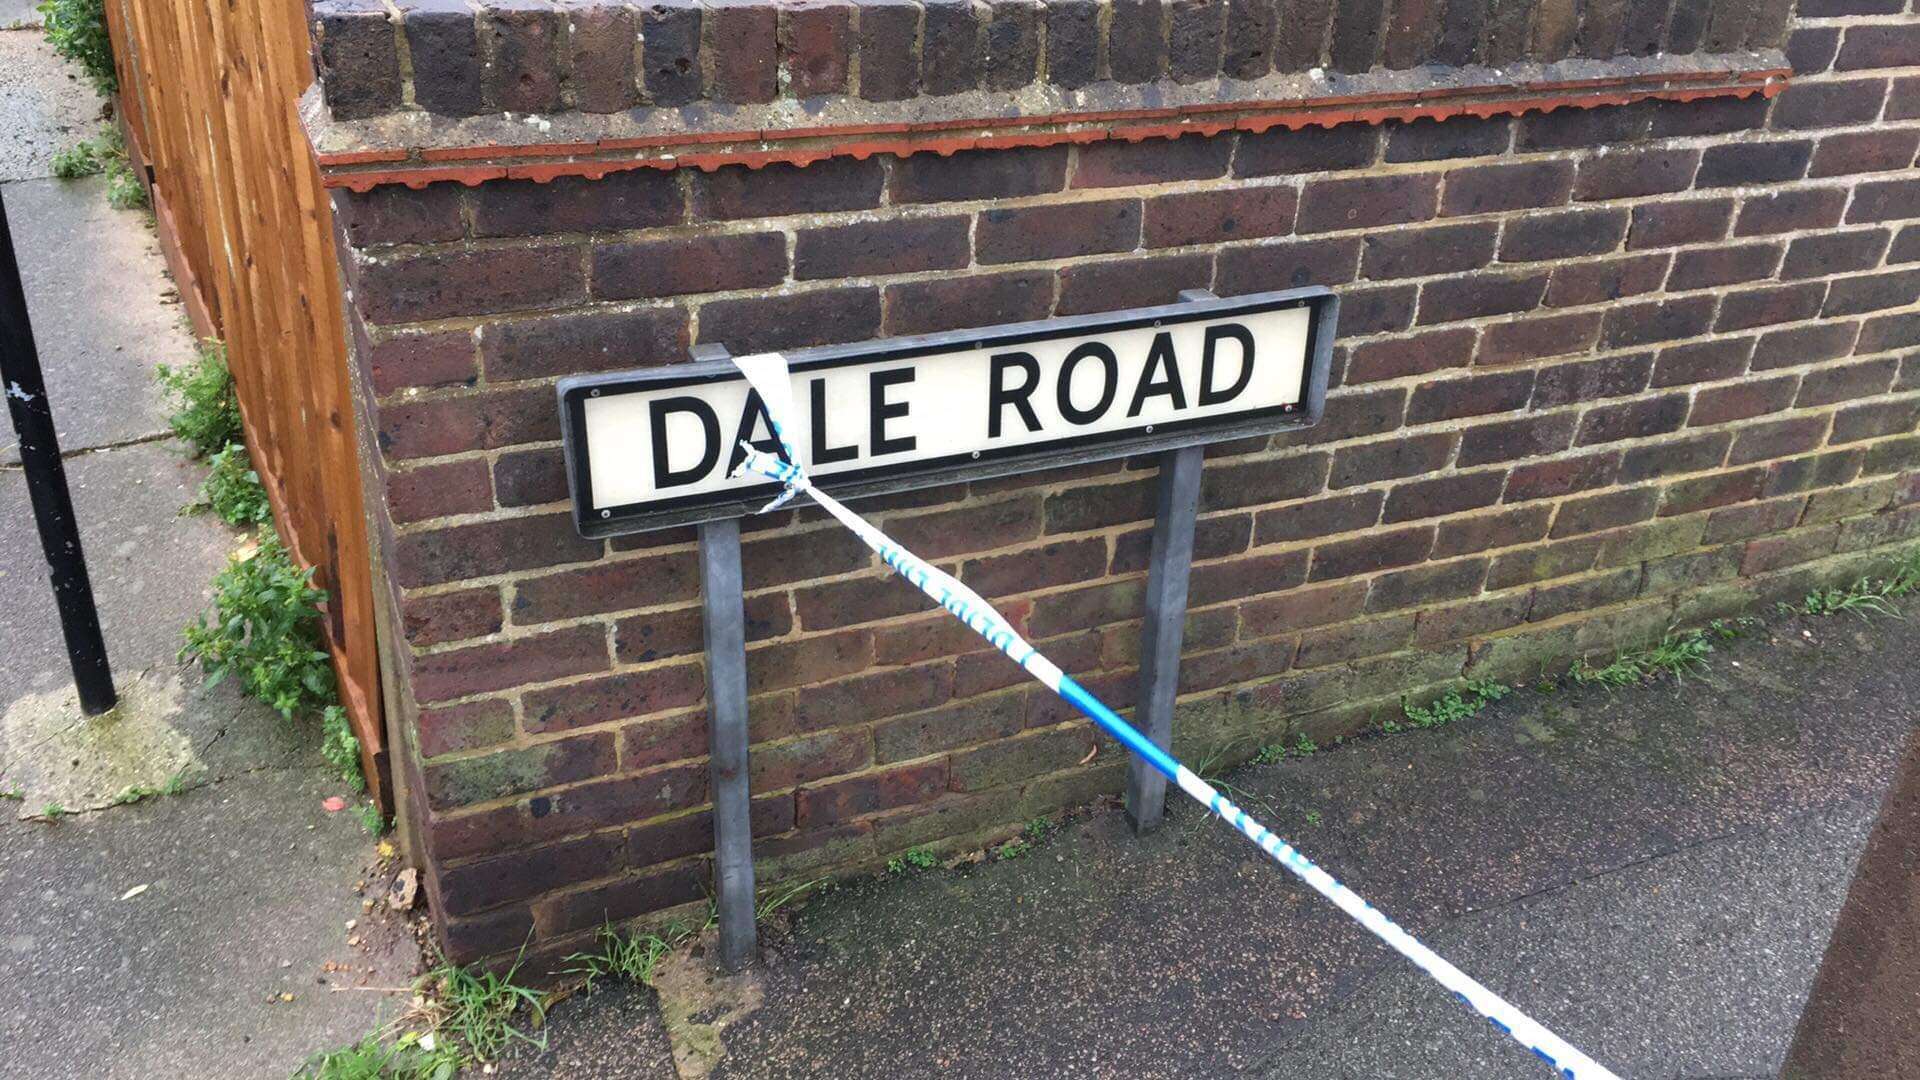 The incident was in Dale Street Road at the junction with Pickwick Crescent, Rochester